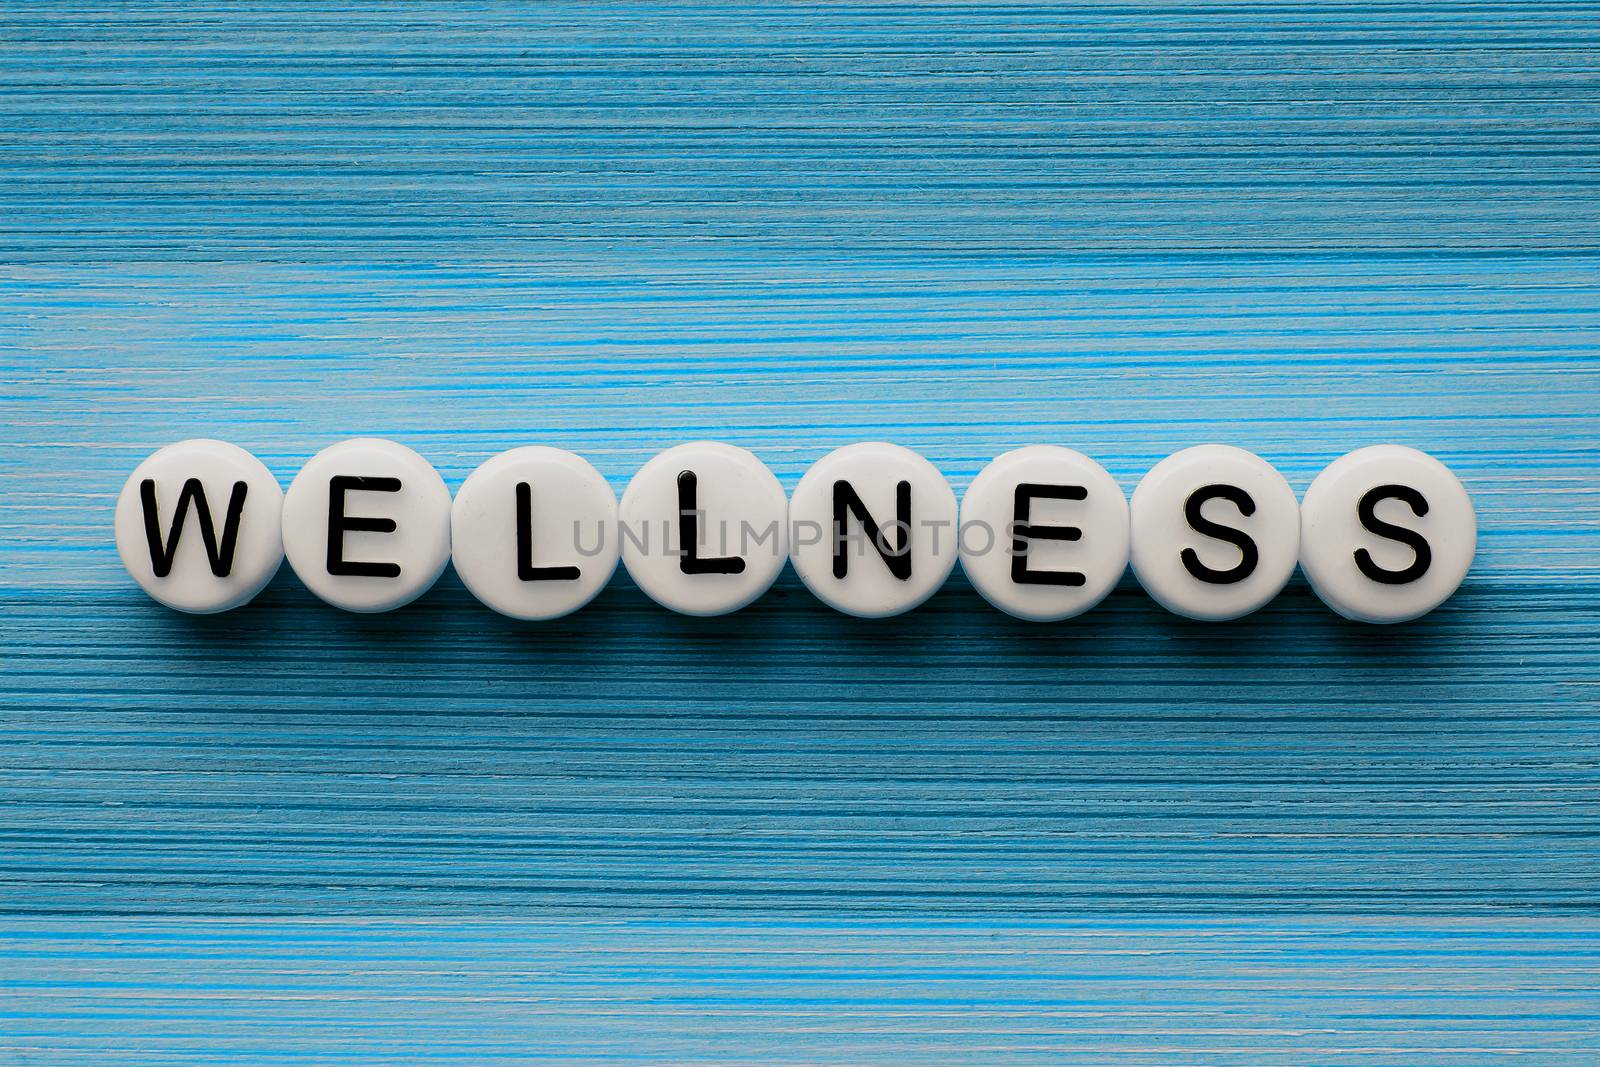 Wellness text on a blue wooden table